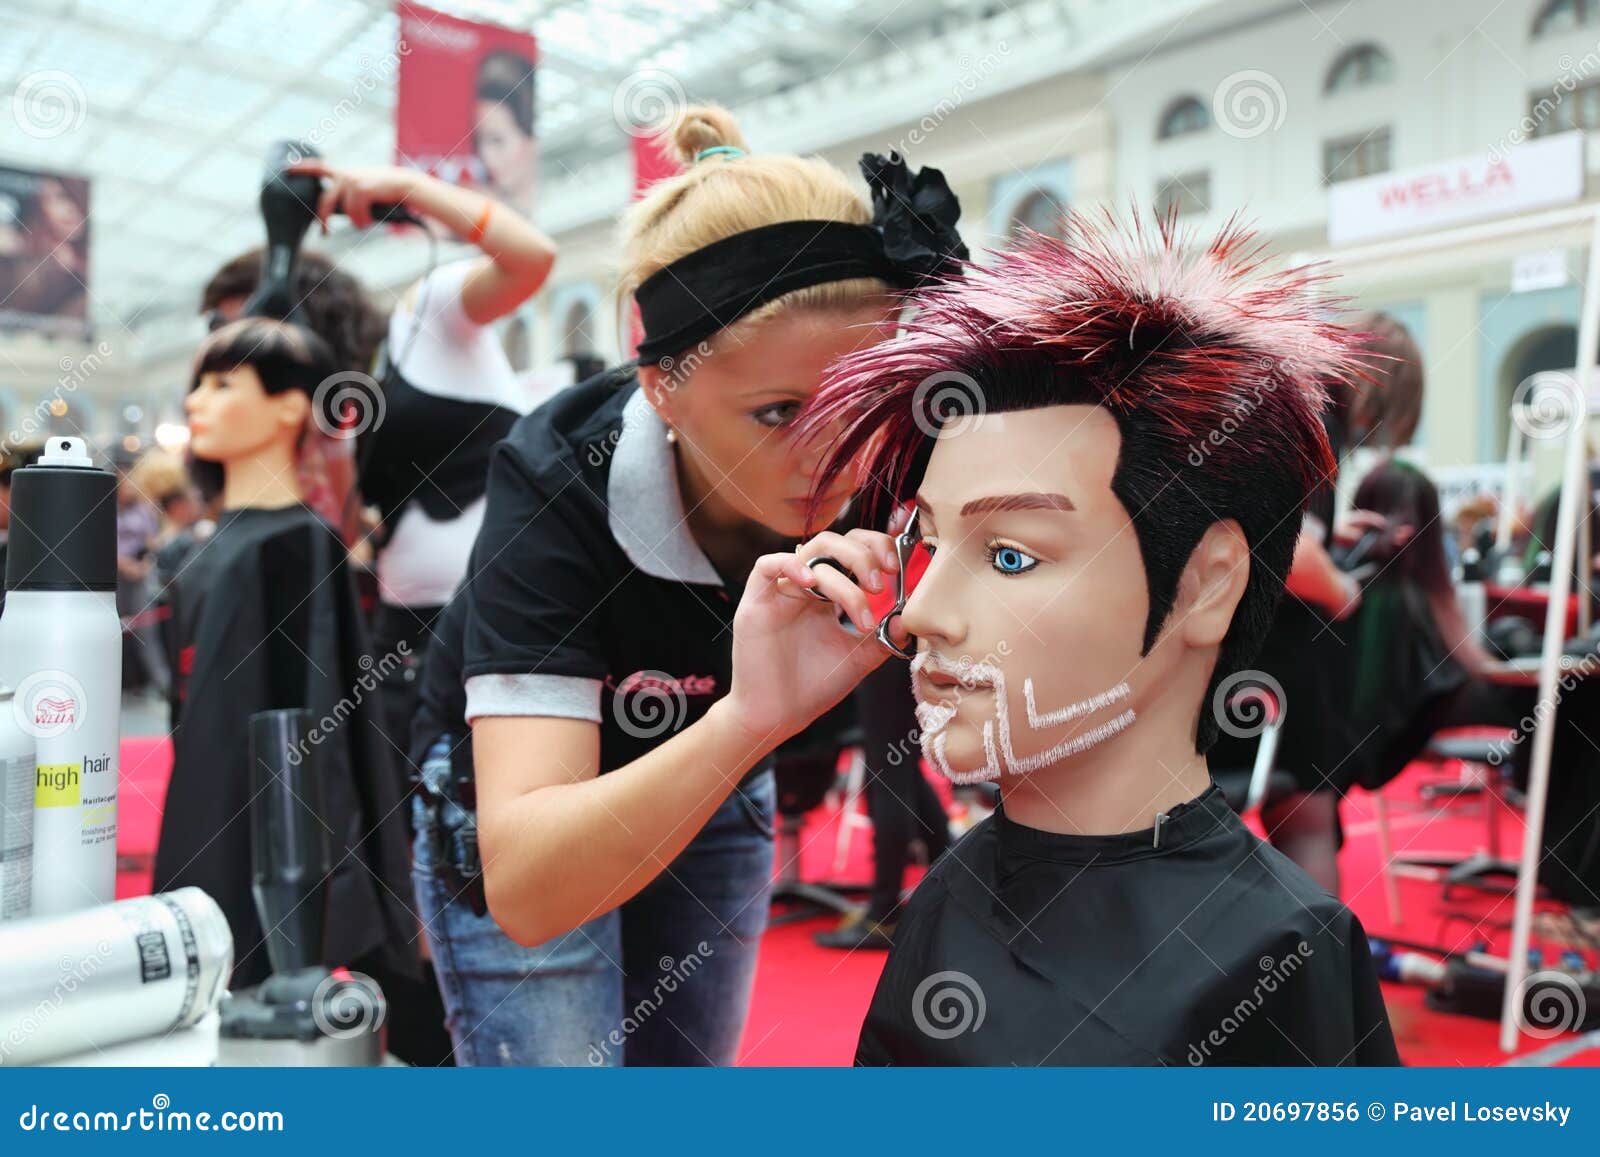 Hairdresser Makes Hairstyle For Manikin Editorial Photo 